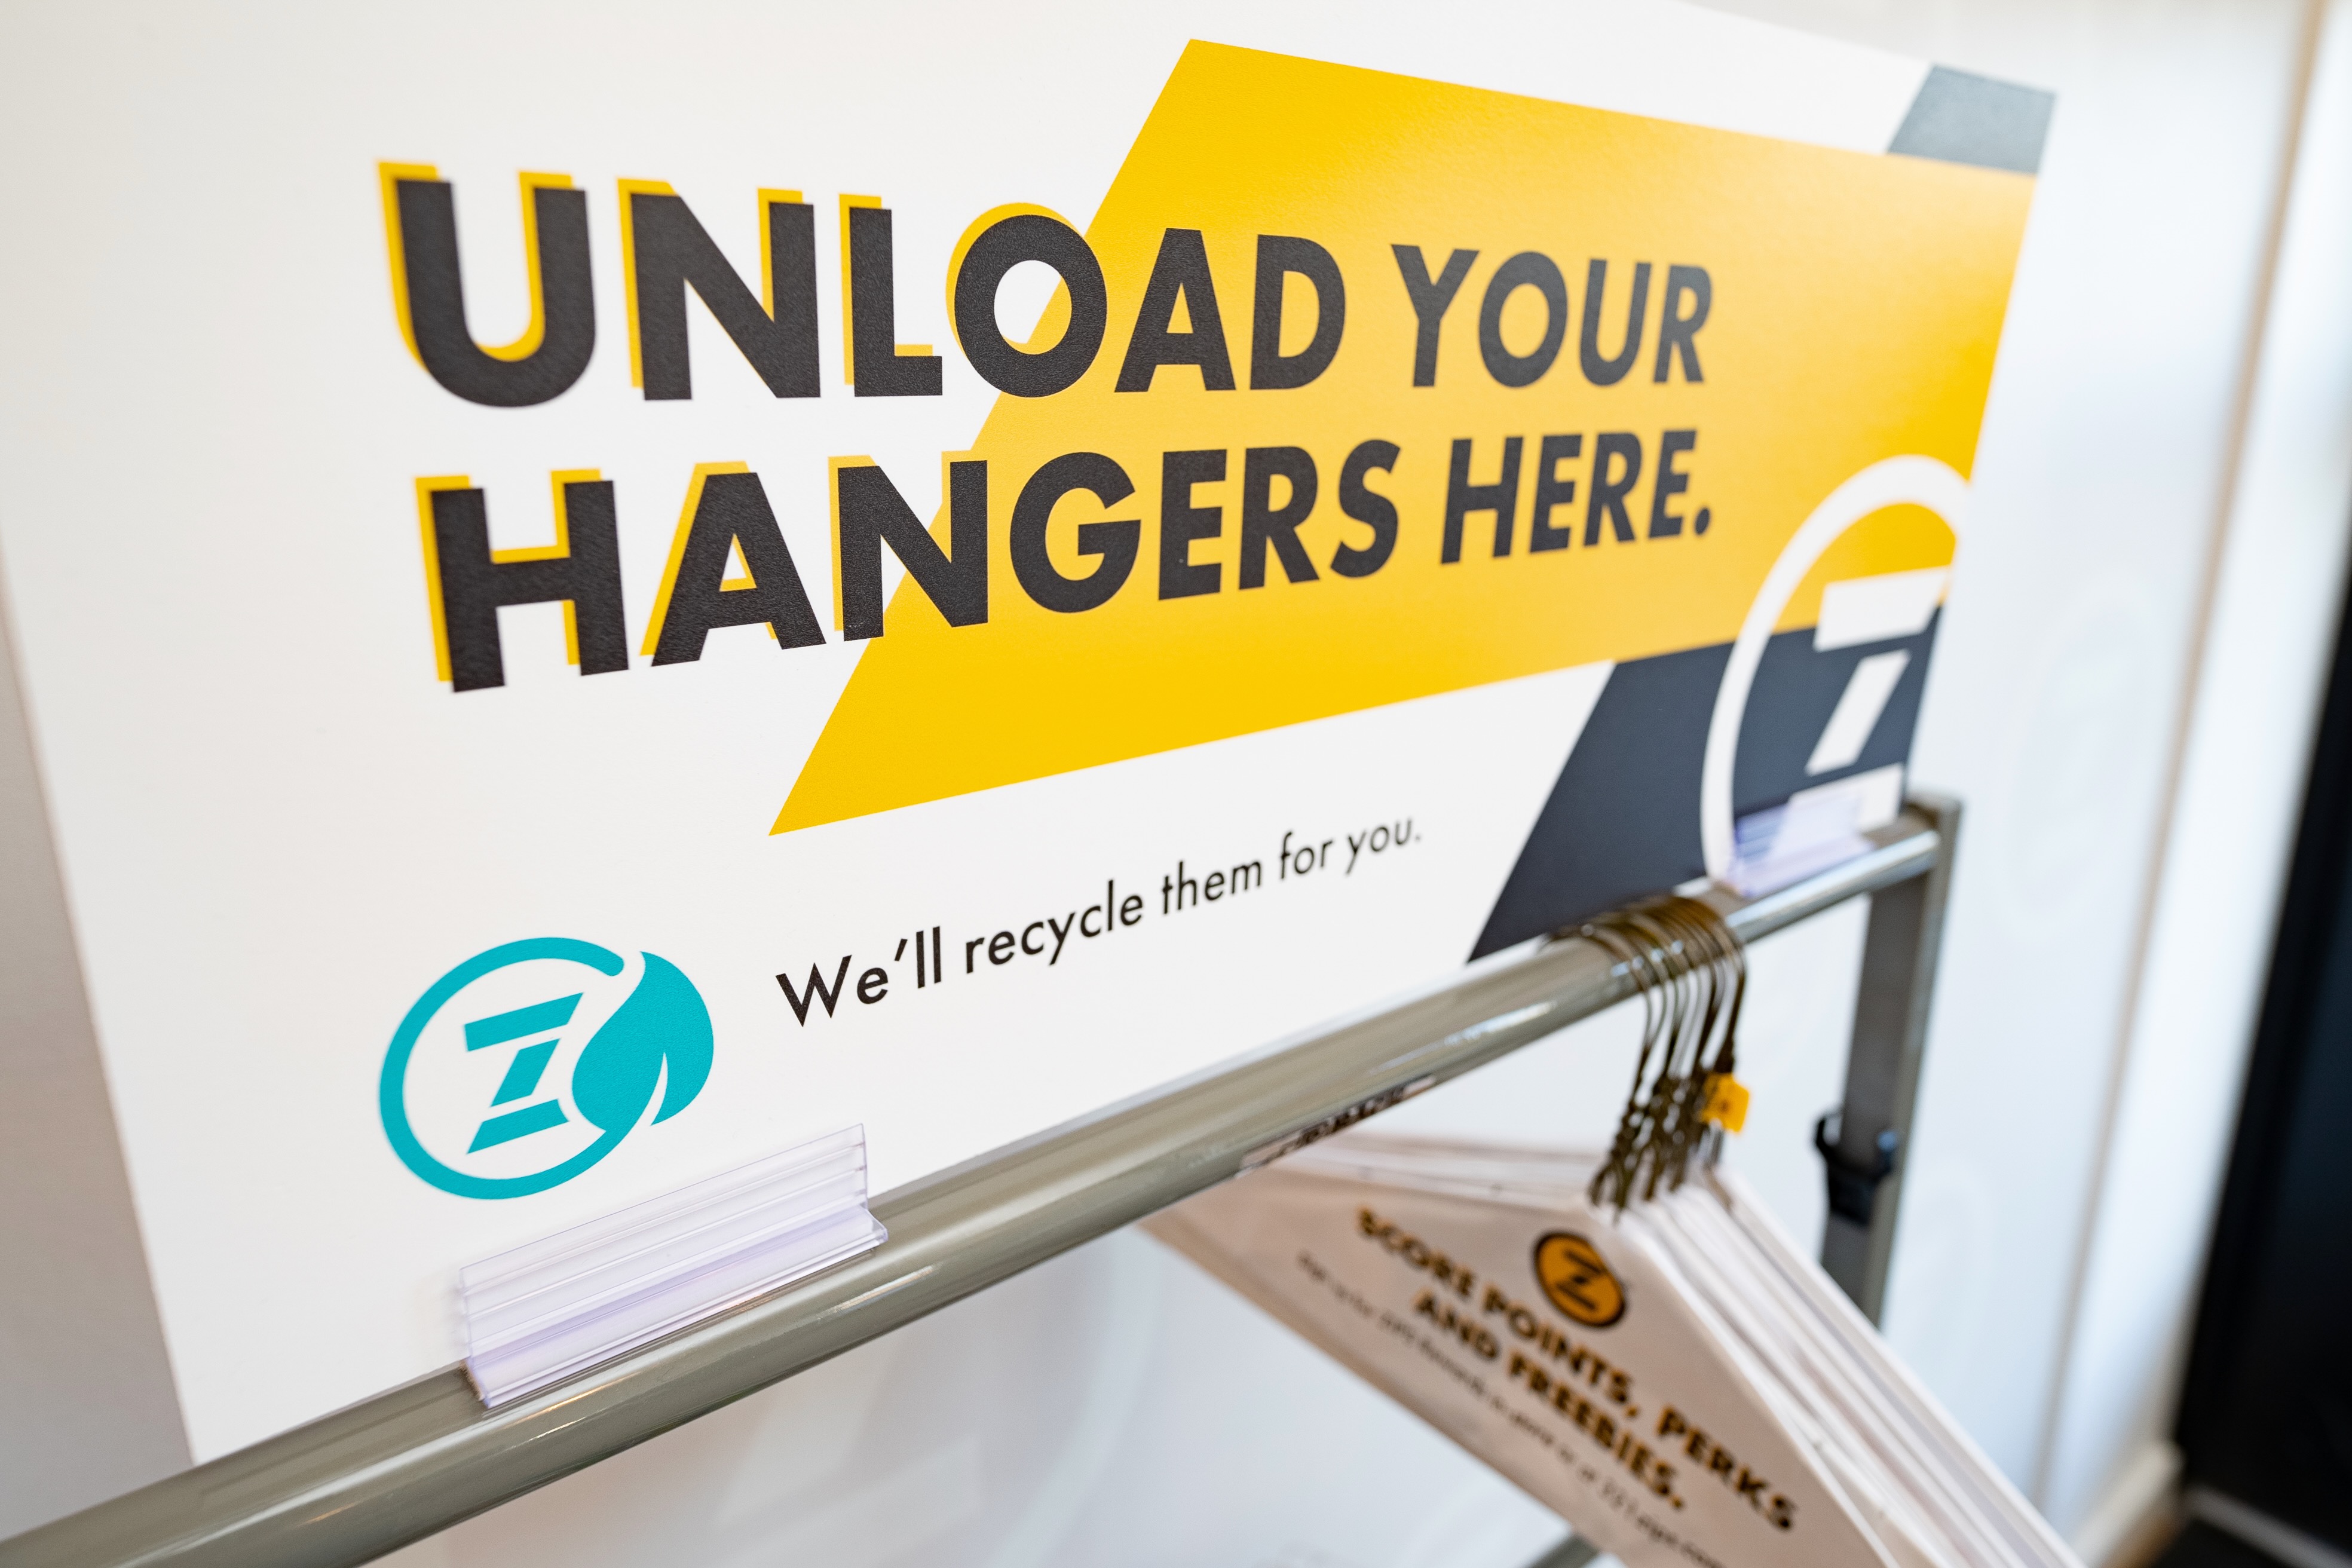 ZIPS Cleaners makes it easy to recycle your unwanted hangers. Just bring them in and hang them on our handy front-of-store rack under our sign 